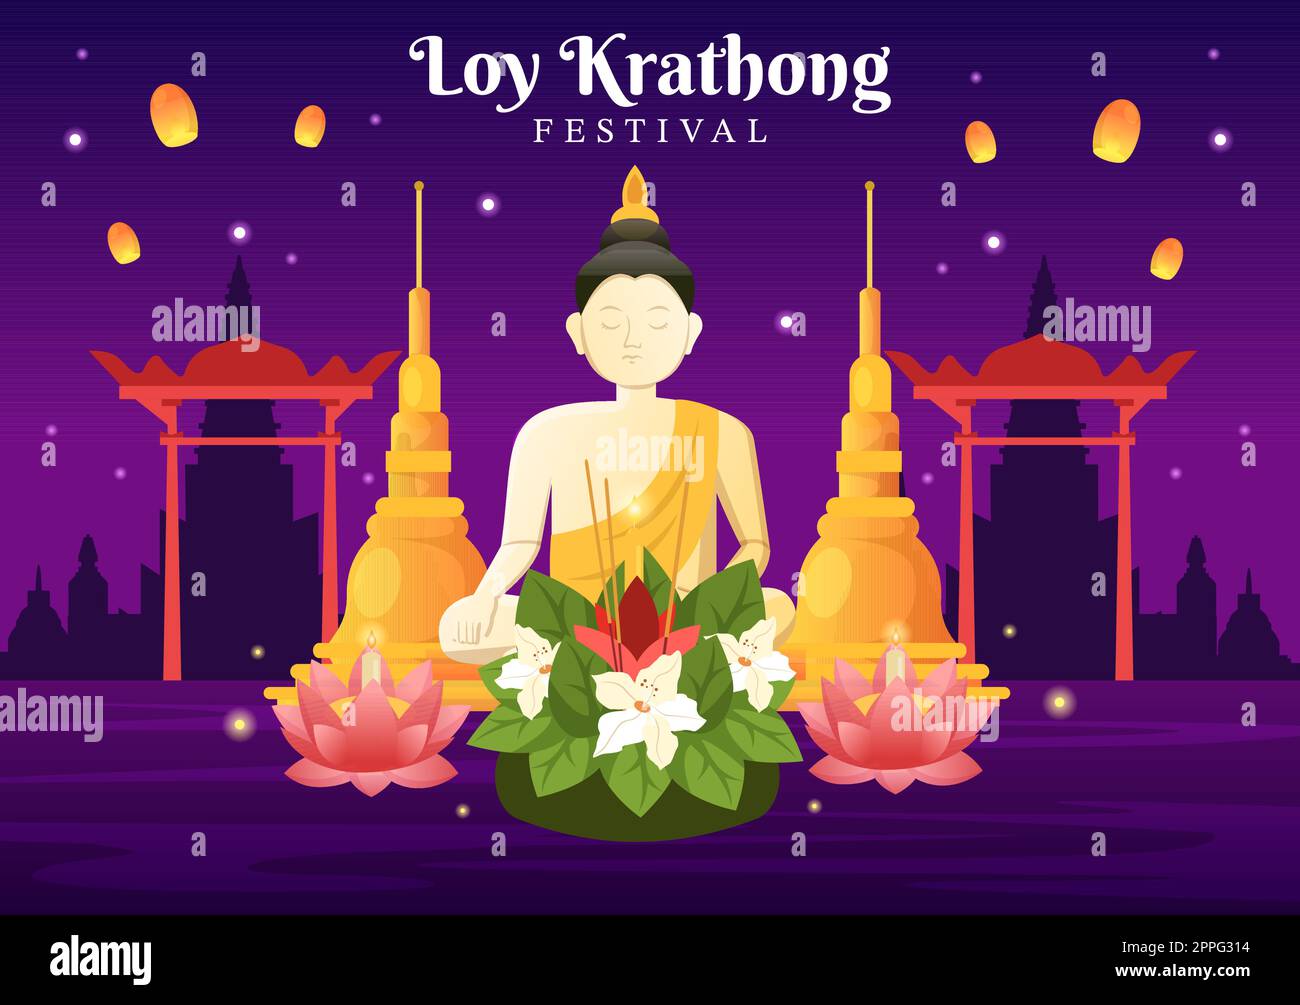 Festival di Loy Krathong Celebration in Thailandia Template Hand Drawed Cartoon Flat Illustration with Lanterns and Krathongs Floating on Water Design Illustrazione Vettoriale